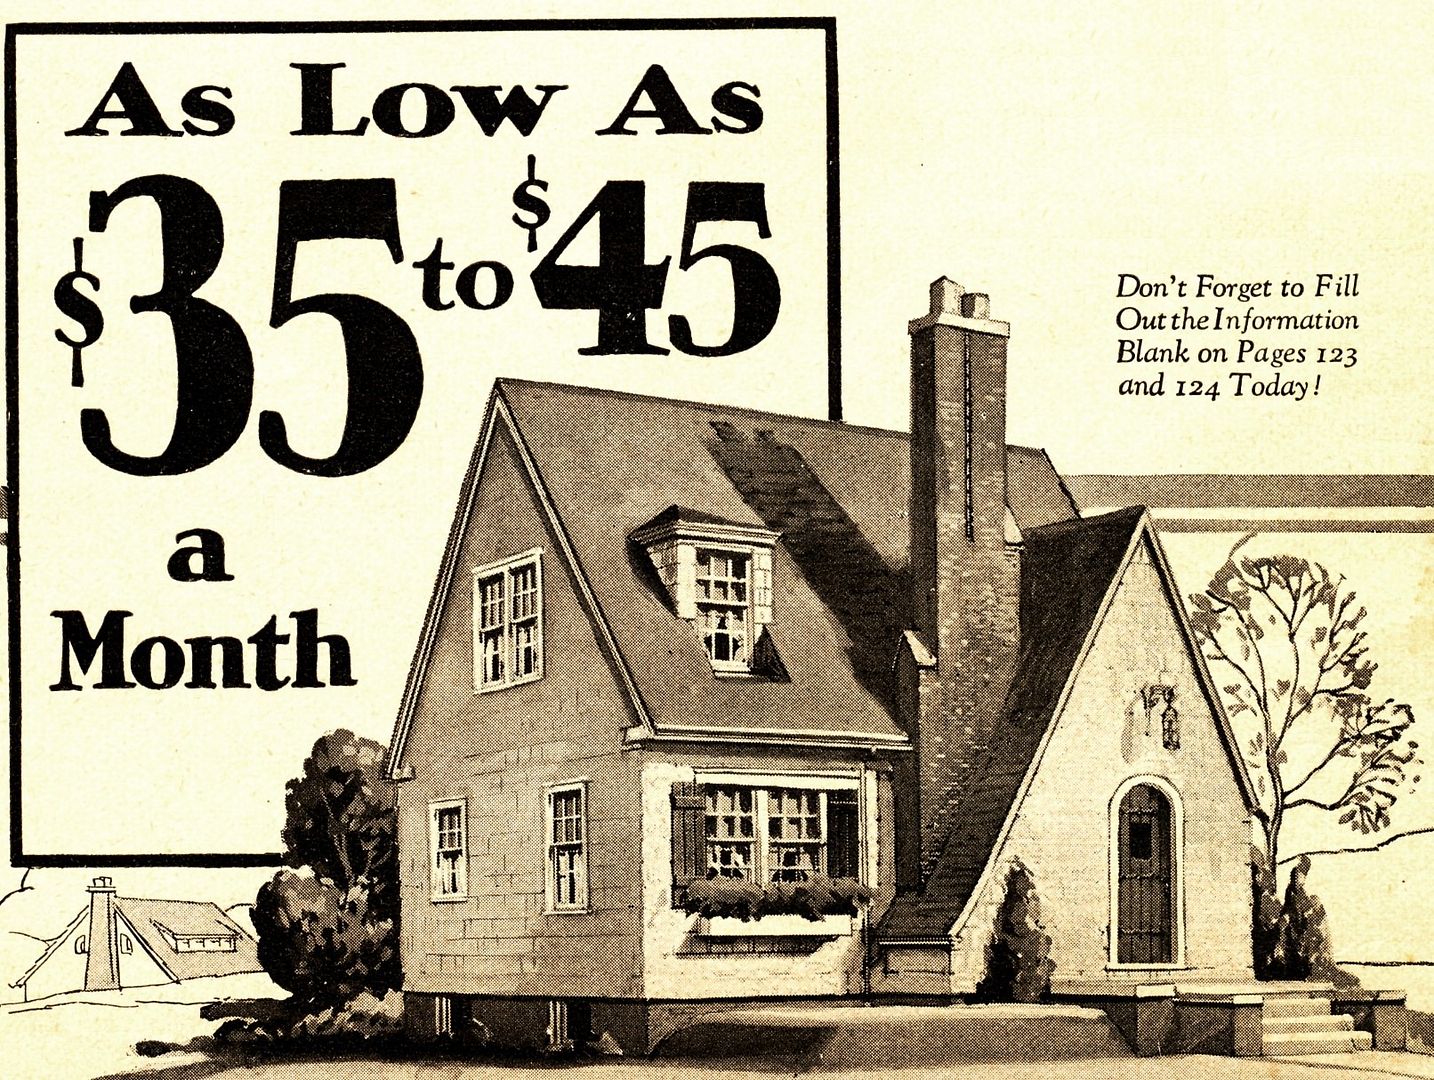 Sears Willard, as seen in this 1928 promotional ad